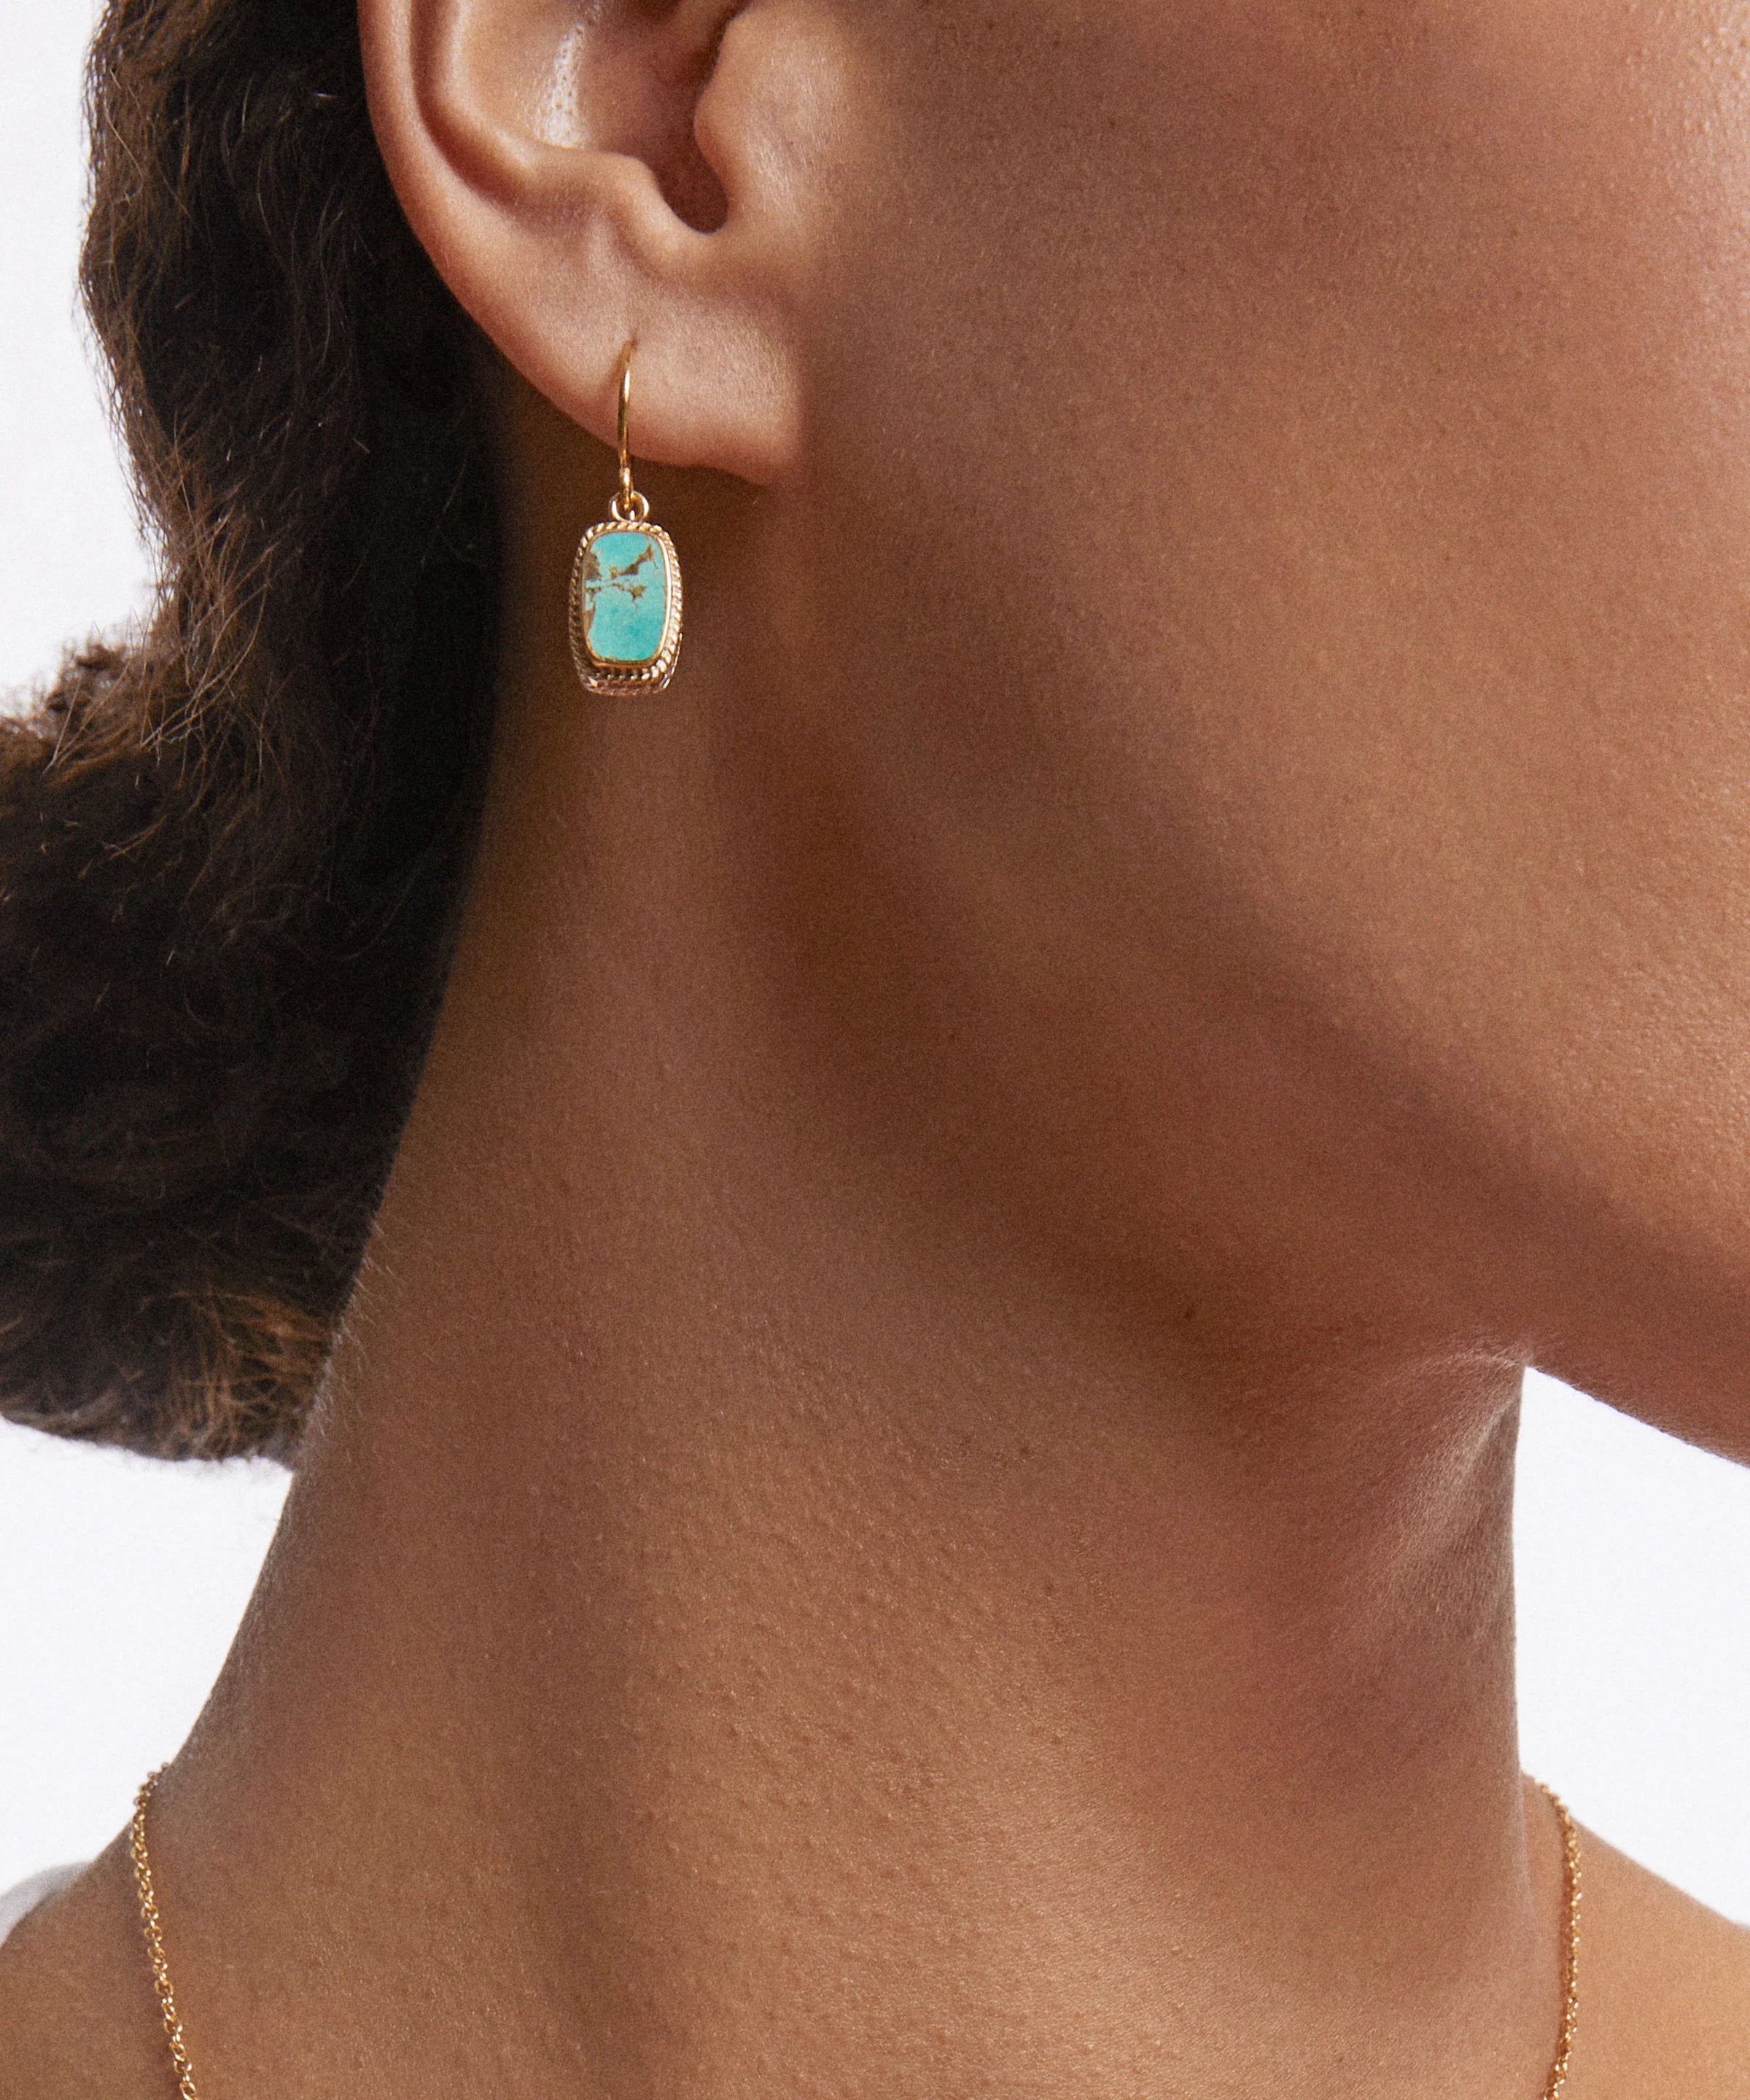 Gold plated drop earrings with oblong turquoise inset stone